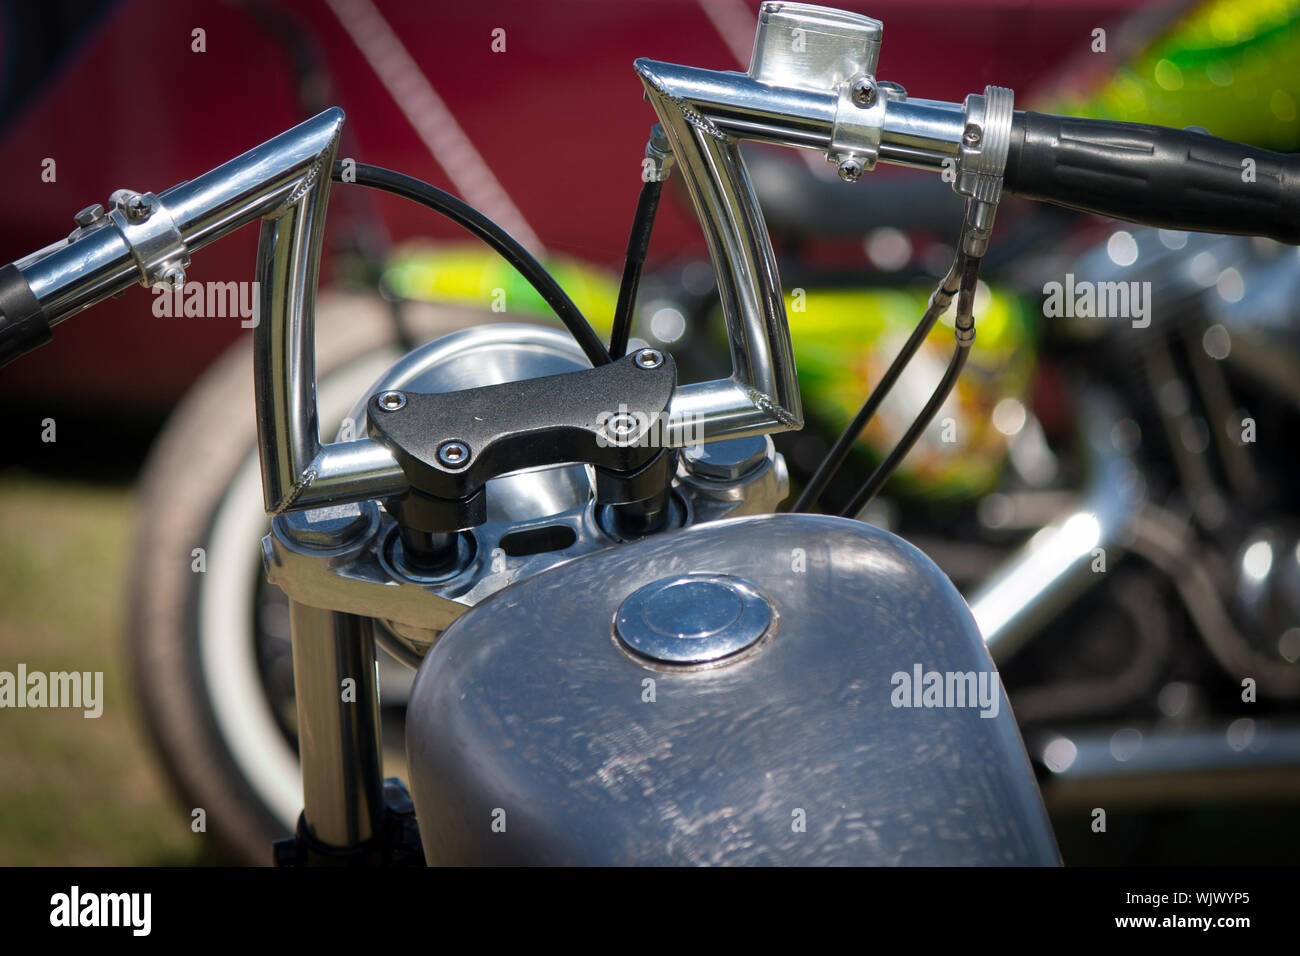 Close-up Of Chopper Motorcycle Stock Photo